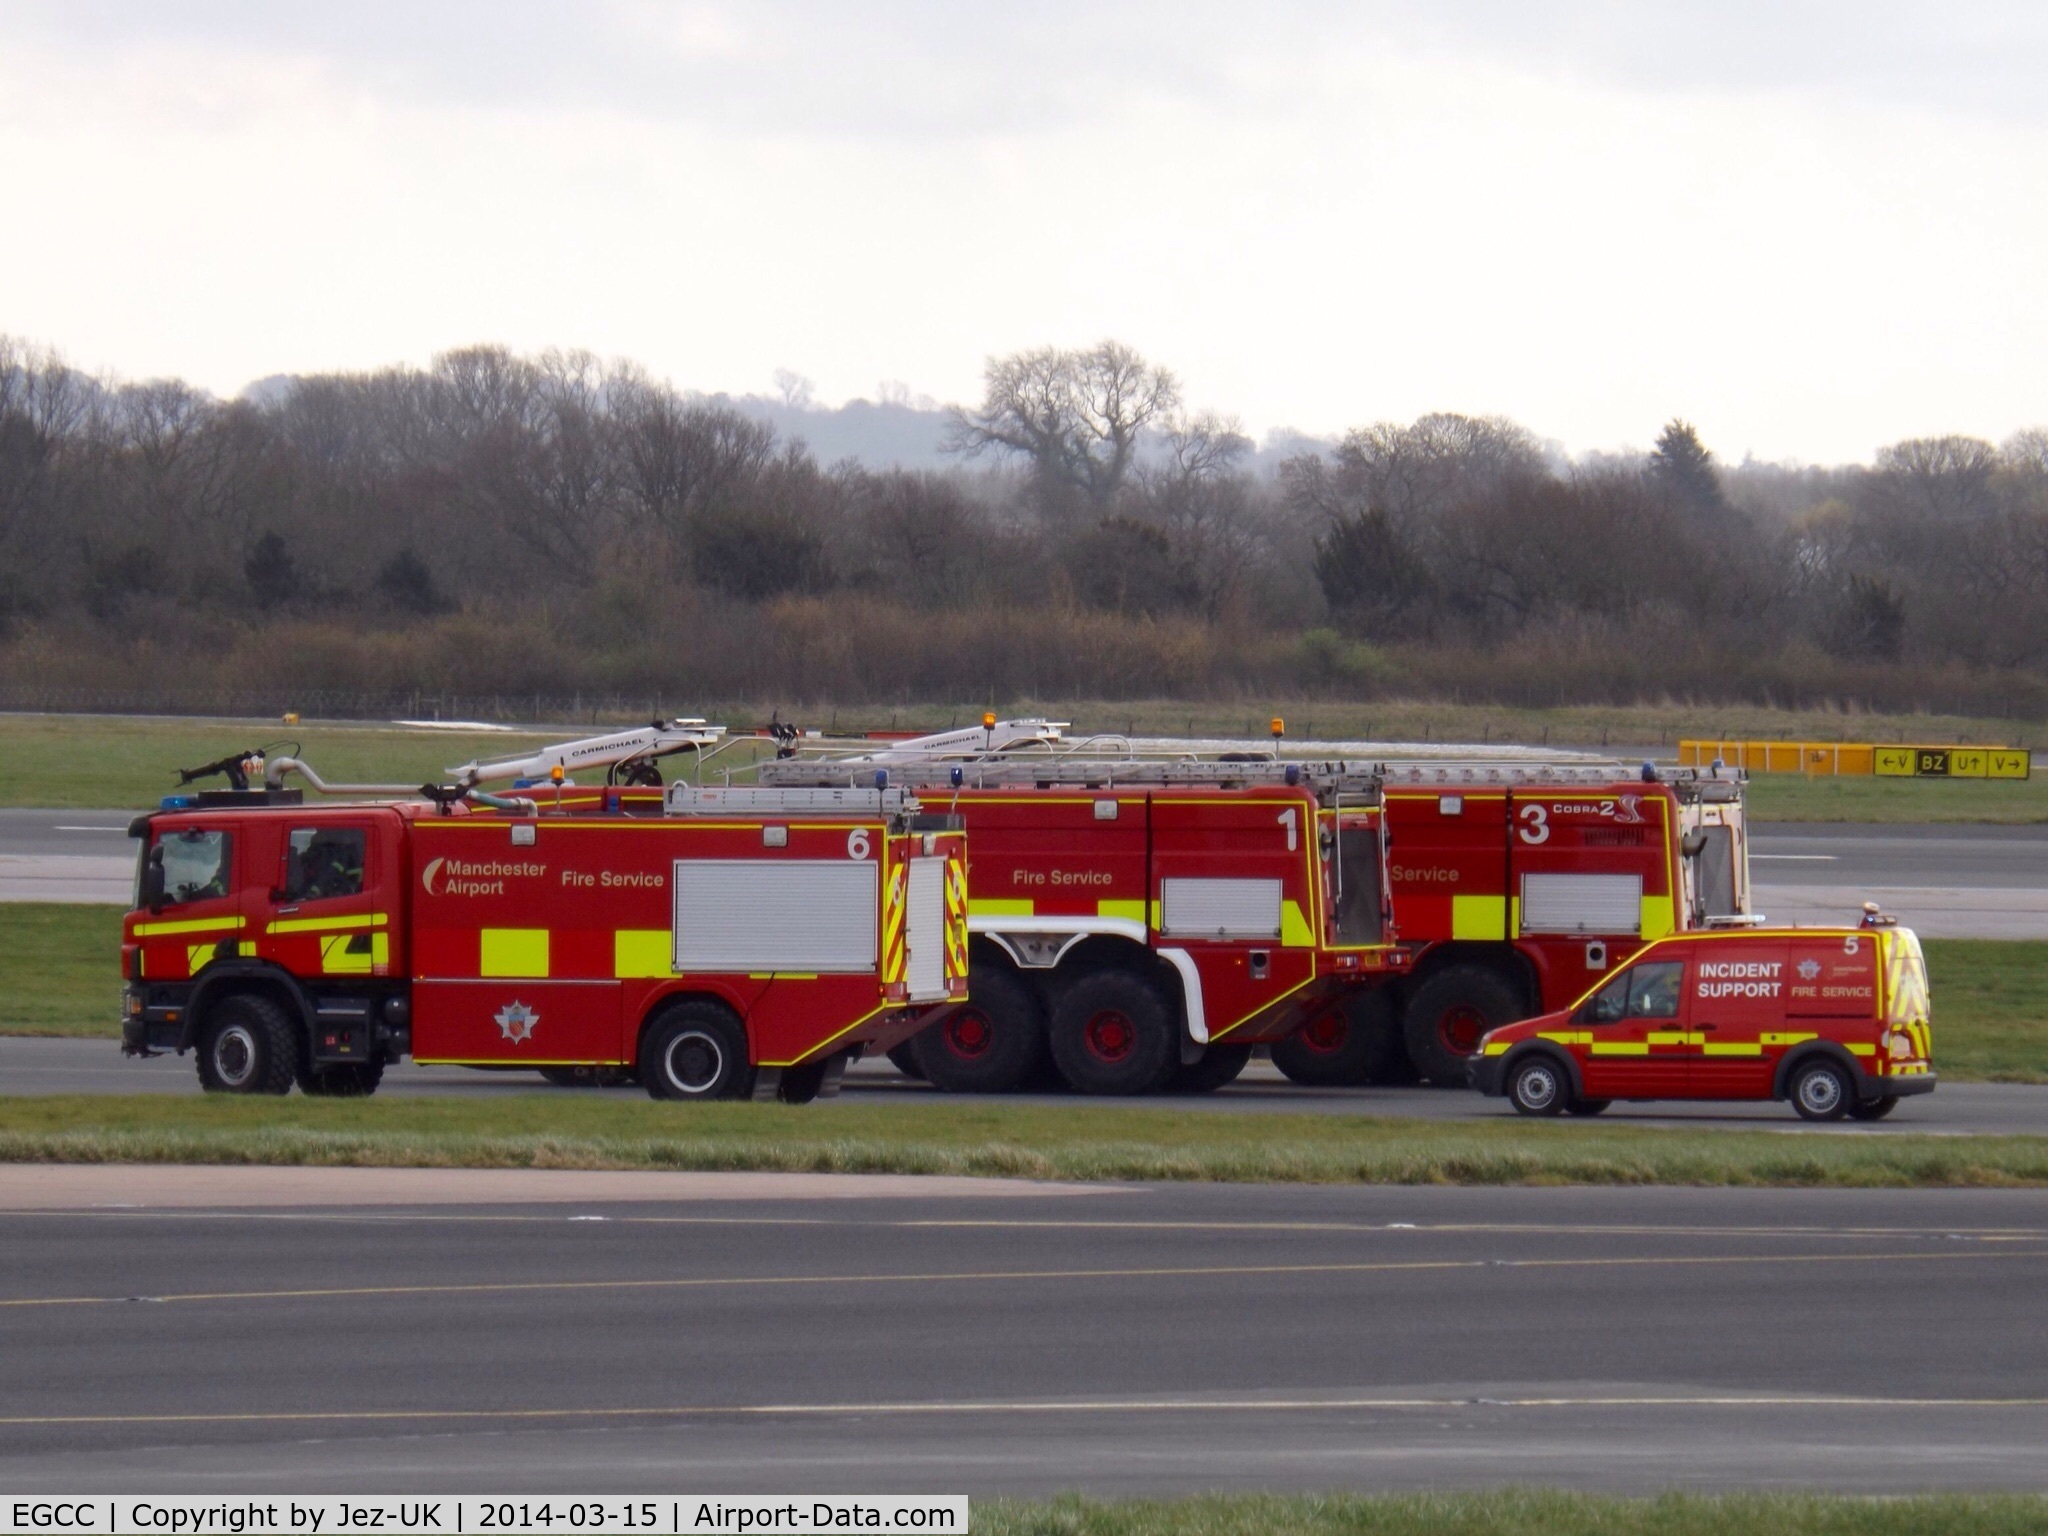 Manchester Airport, Manchester, England United Kingdom (EGCC) - some of airport fire service on standby,